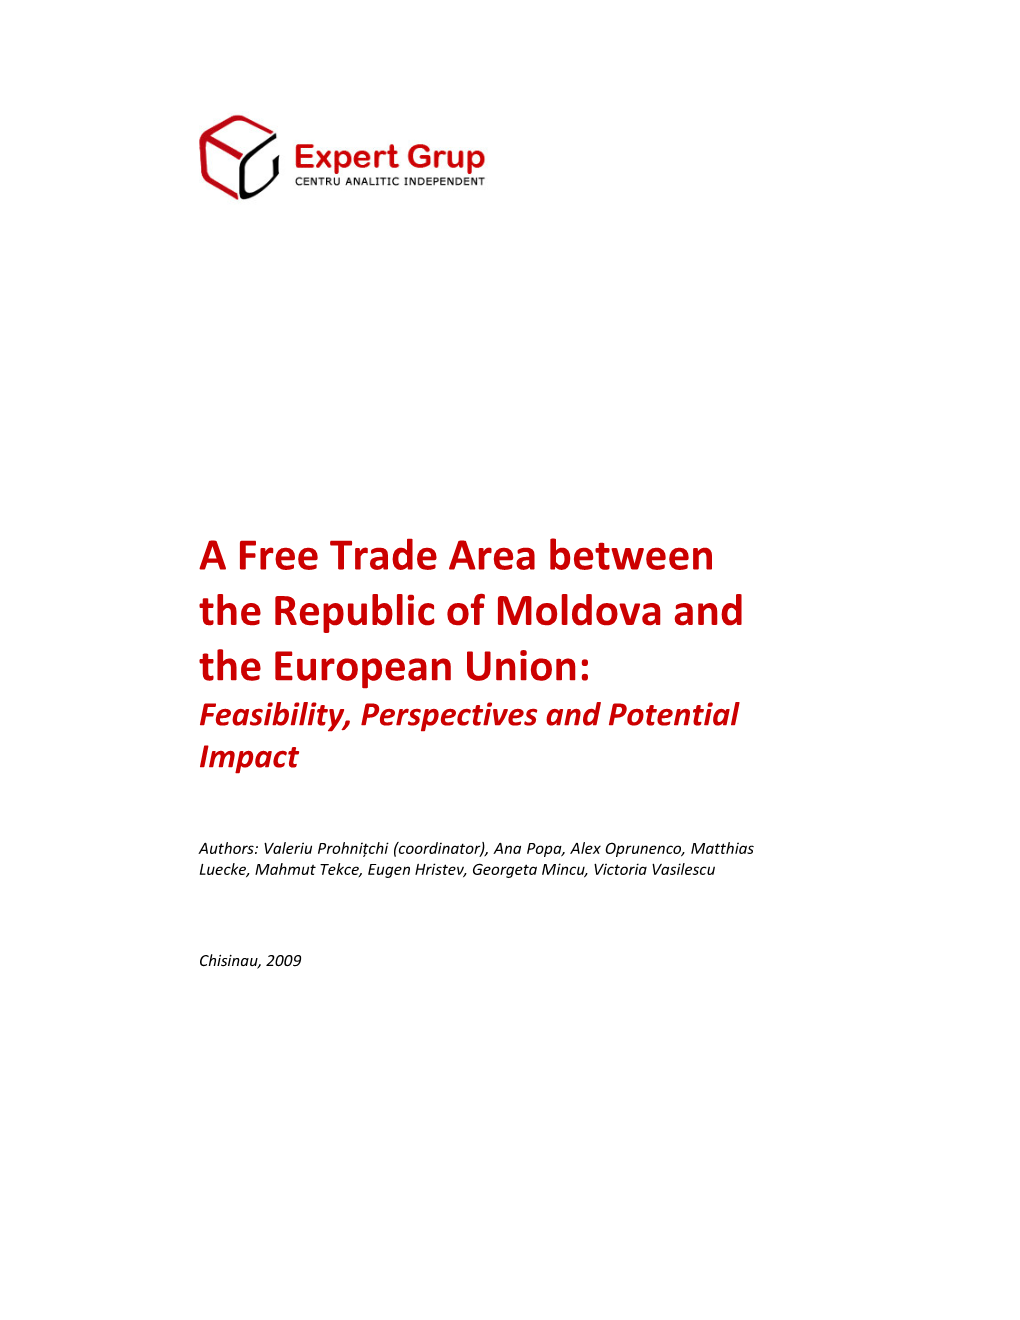 A Free Trade Area Between the Republic of Moldova and the European Union: Feasibility, Perspectives and Potential Impact